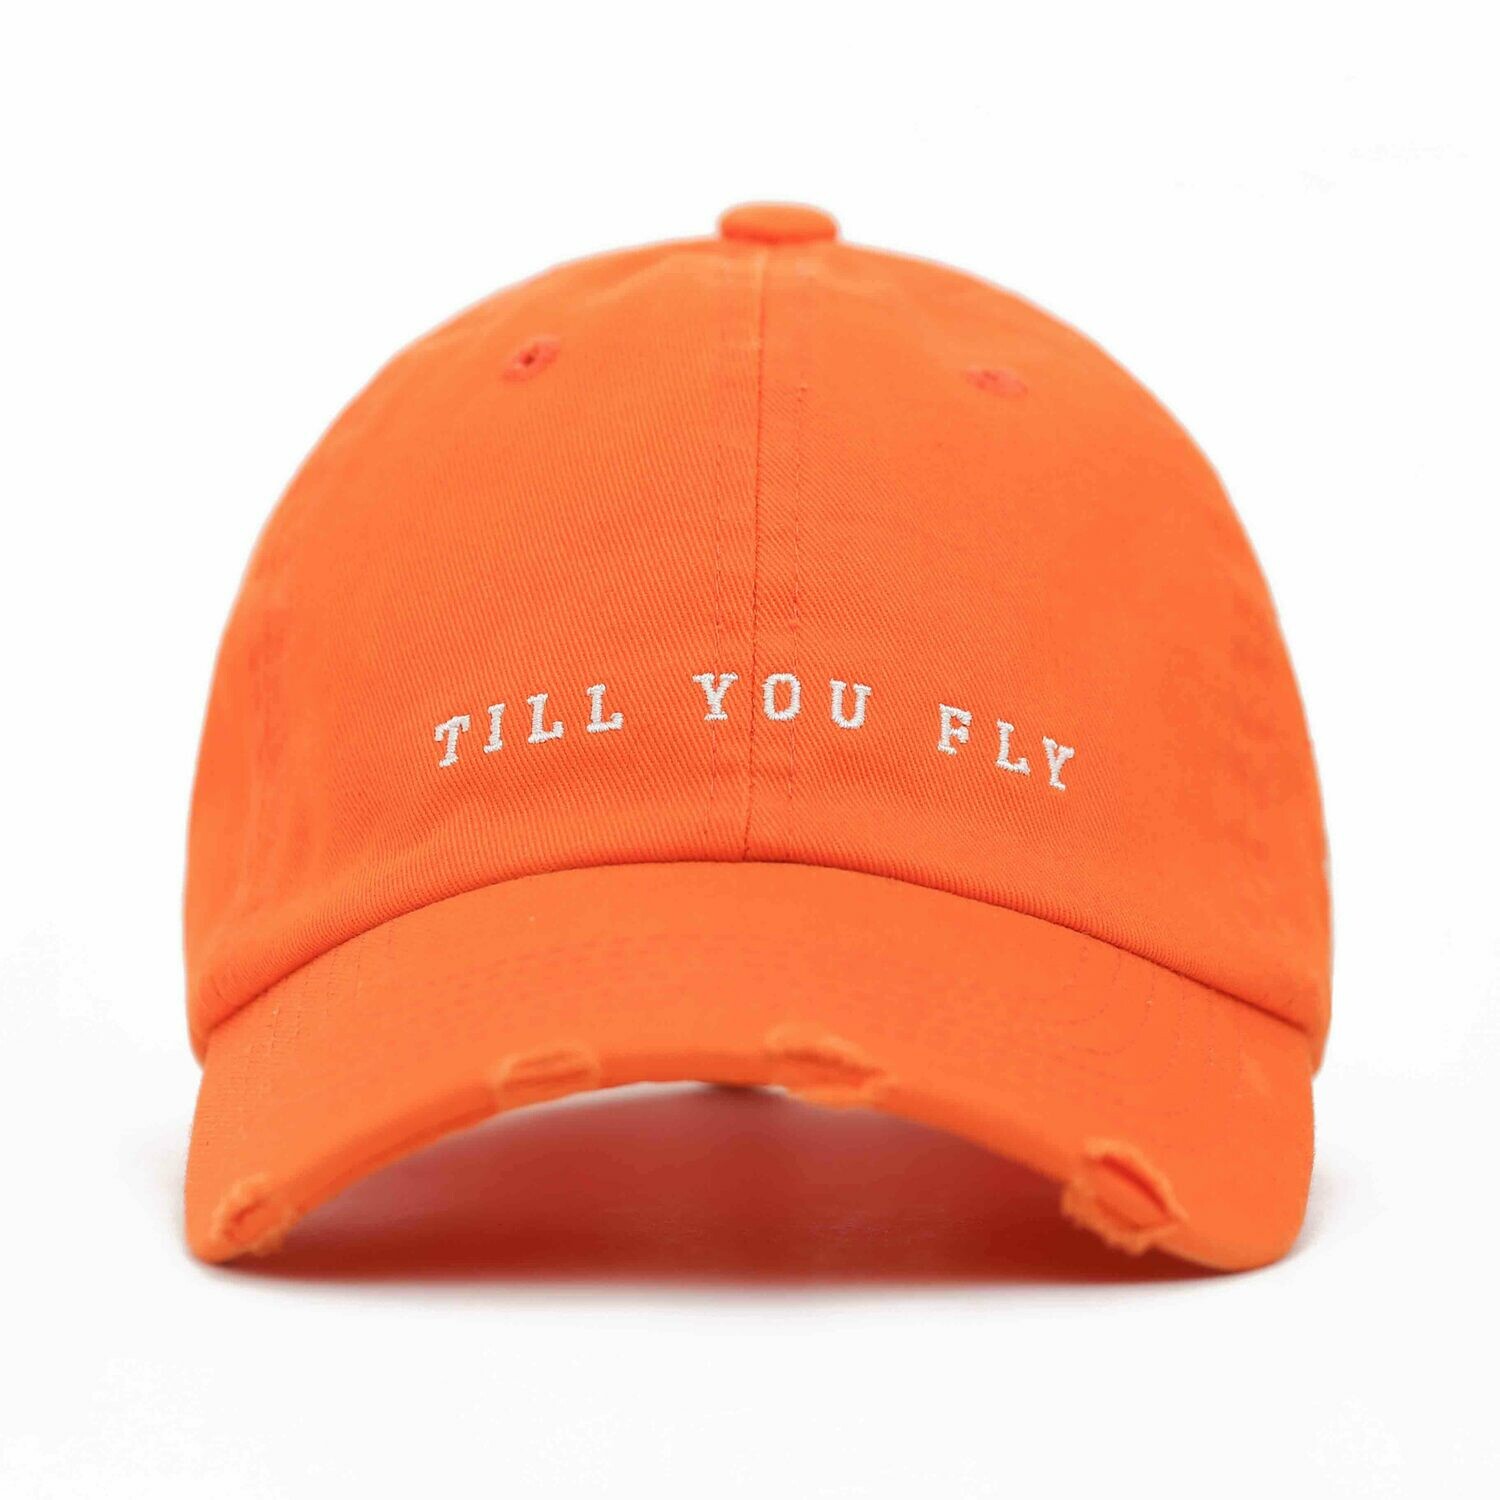 "Till You Fly" is the way casual headwear